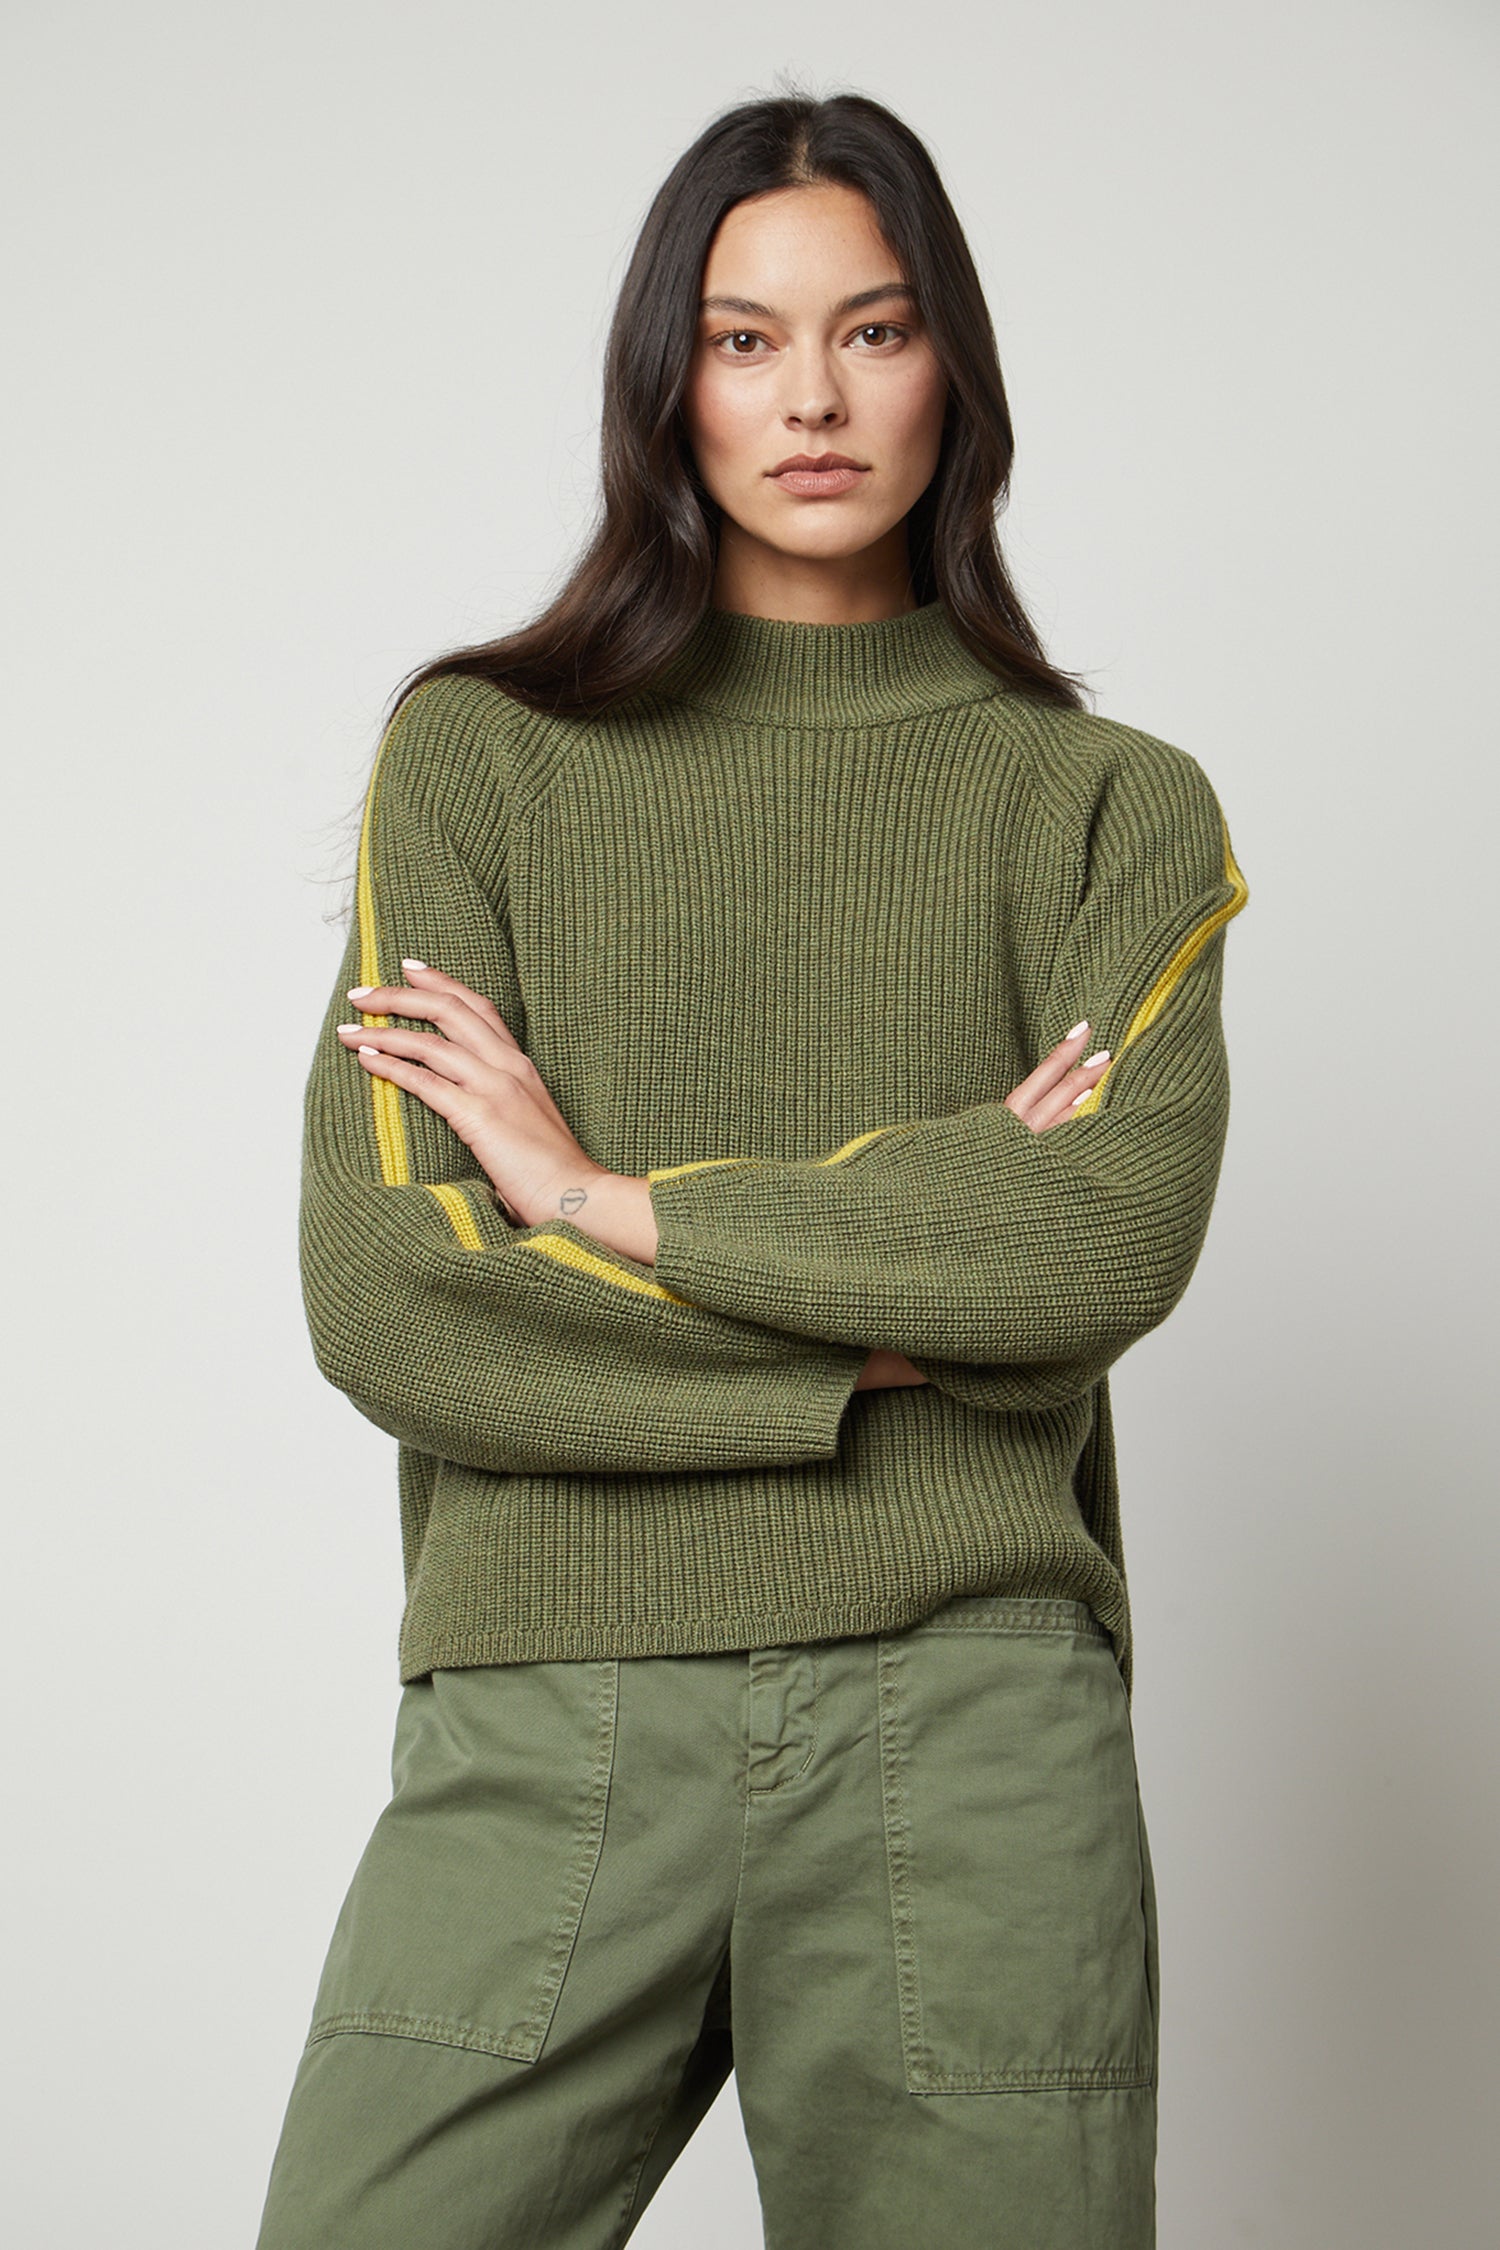   The model is wearing a comfortable Velvet by Graham & Spencer TEAGAN MOCK NECK SWEATER with yellow stripes. 